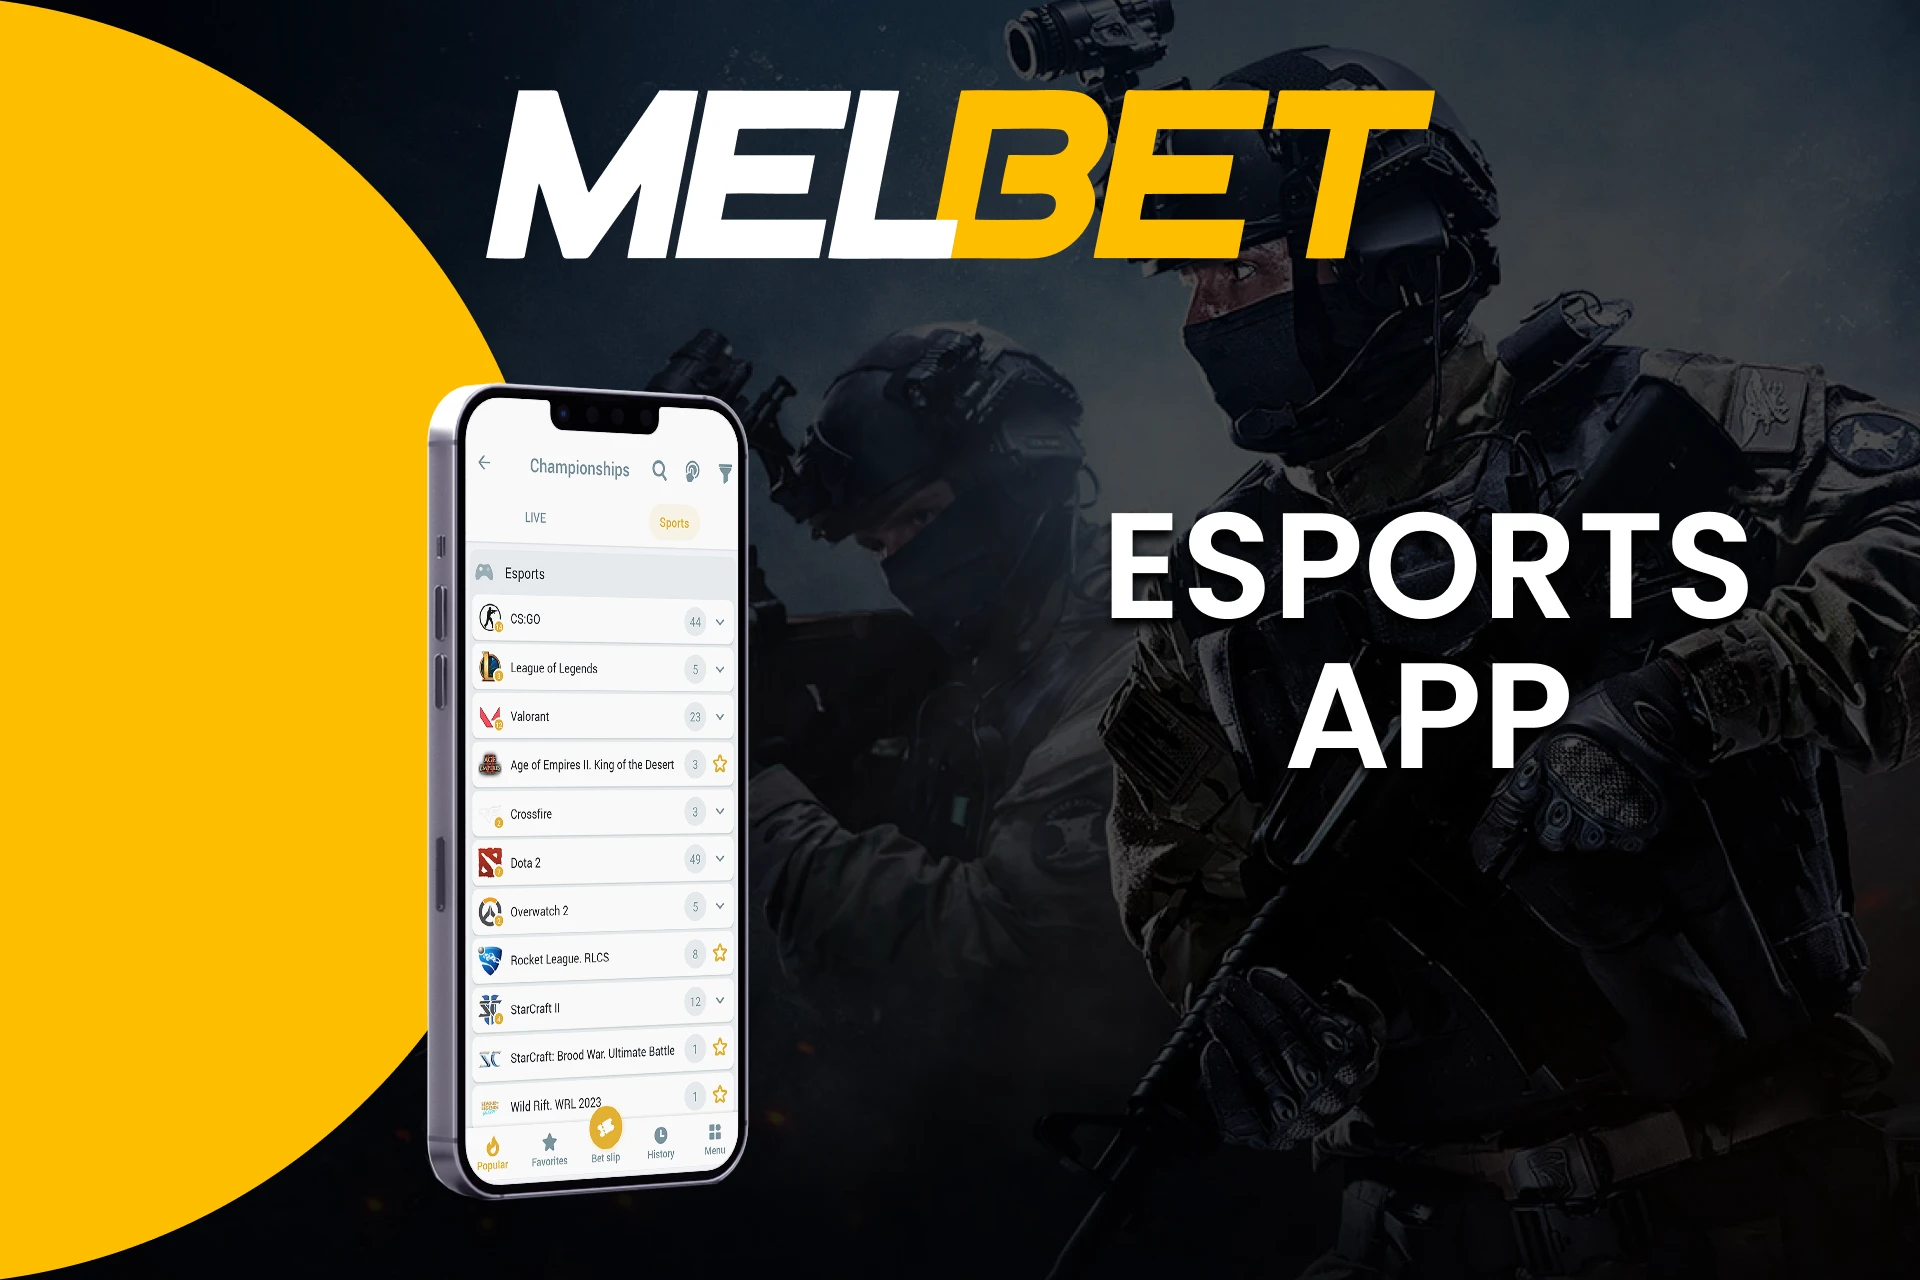 For Esports betting, you can use the Melbet app.